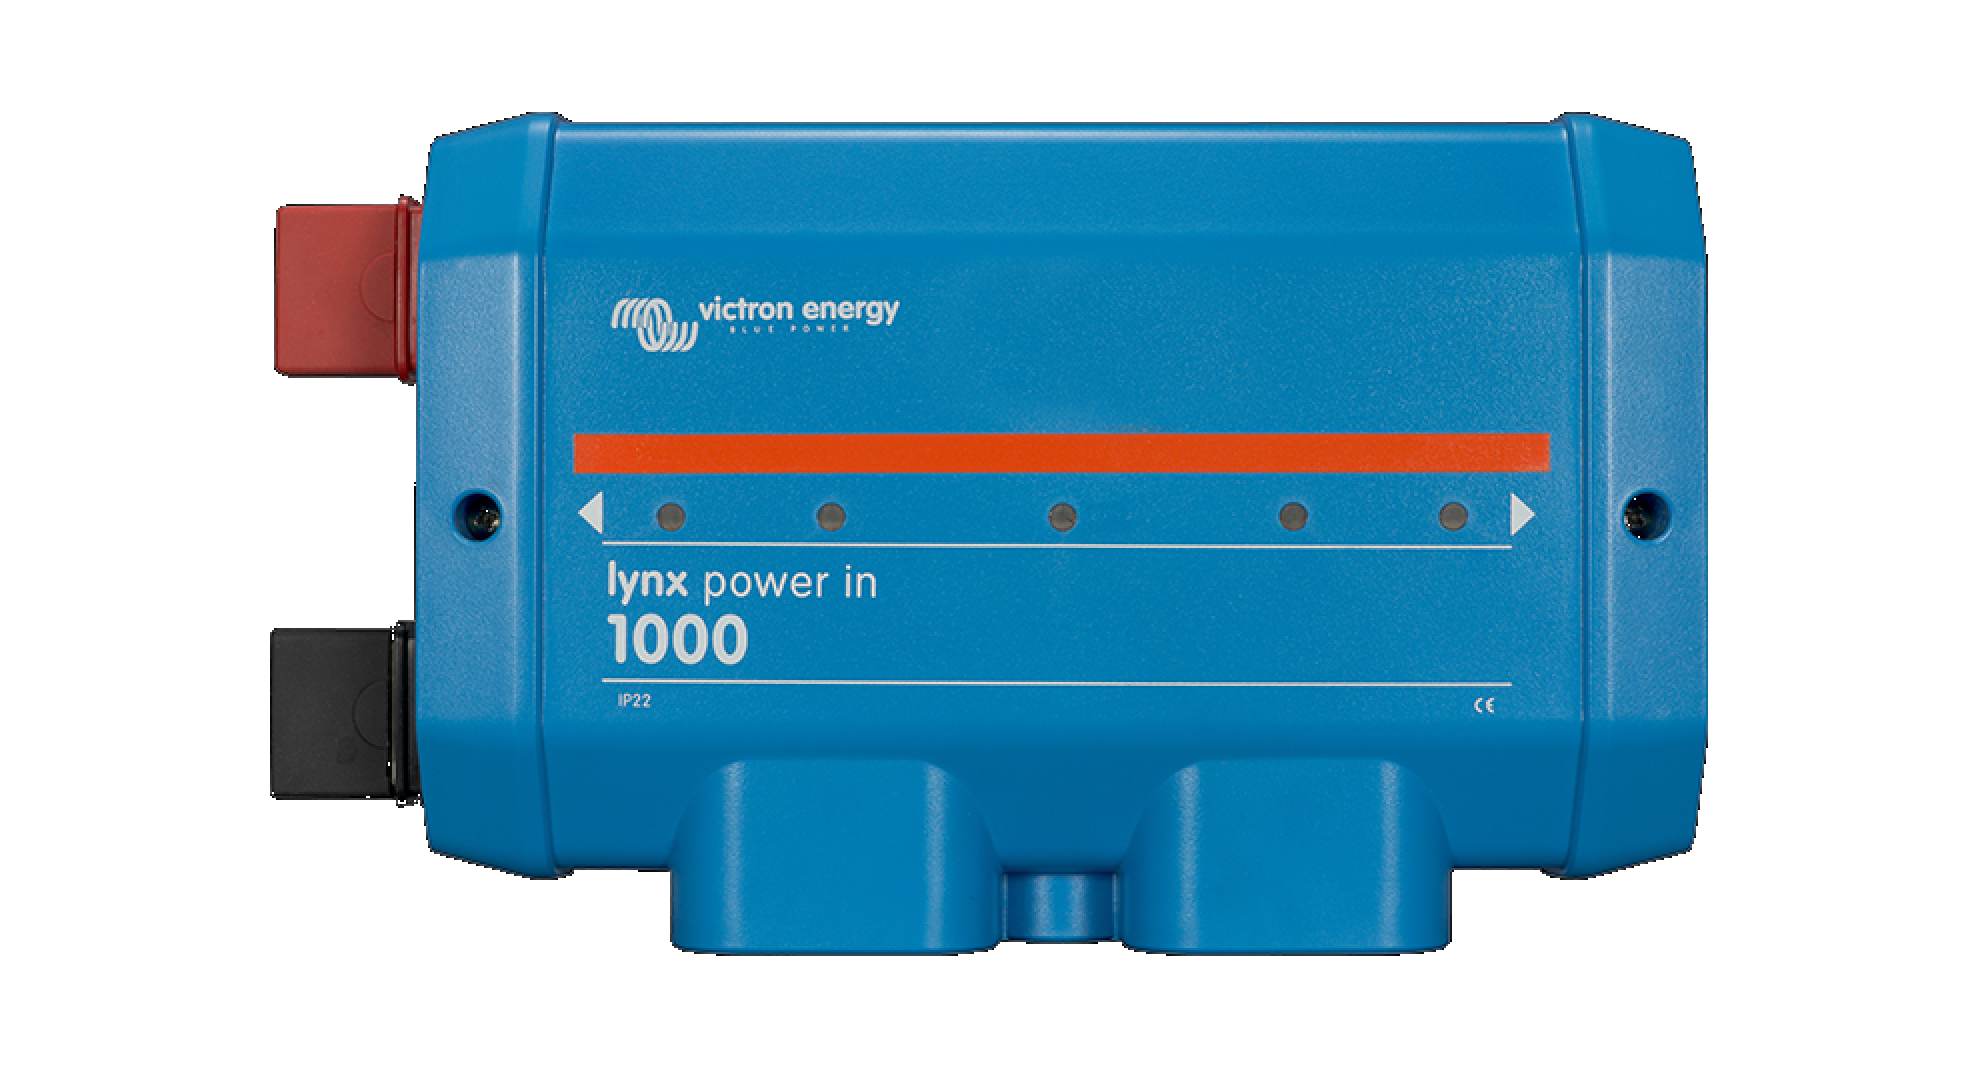 The Lynx Power In module is used to connect batter